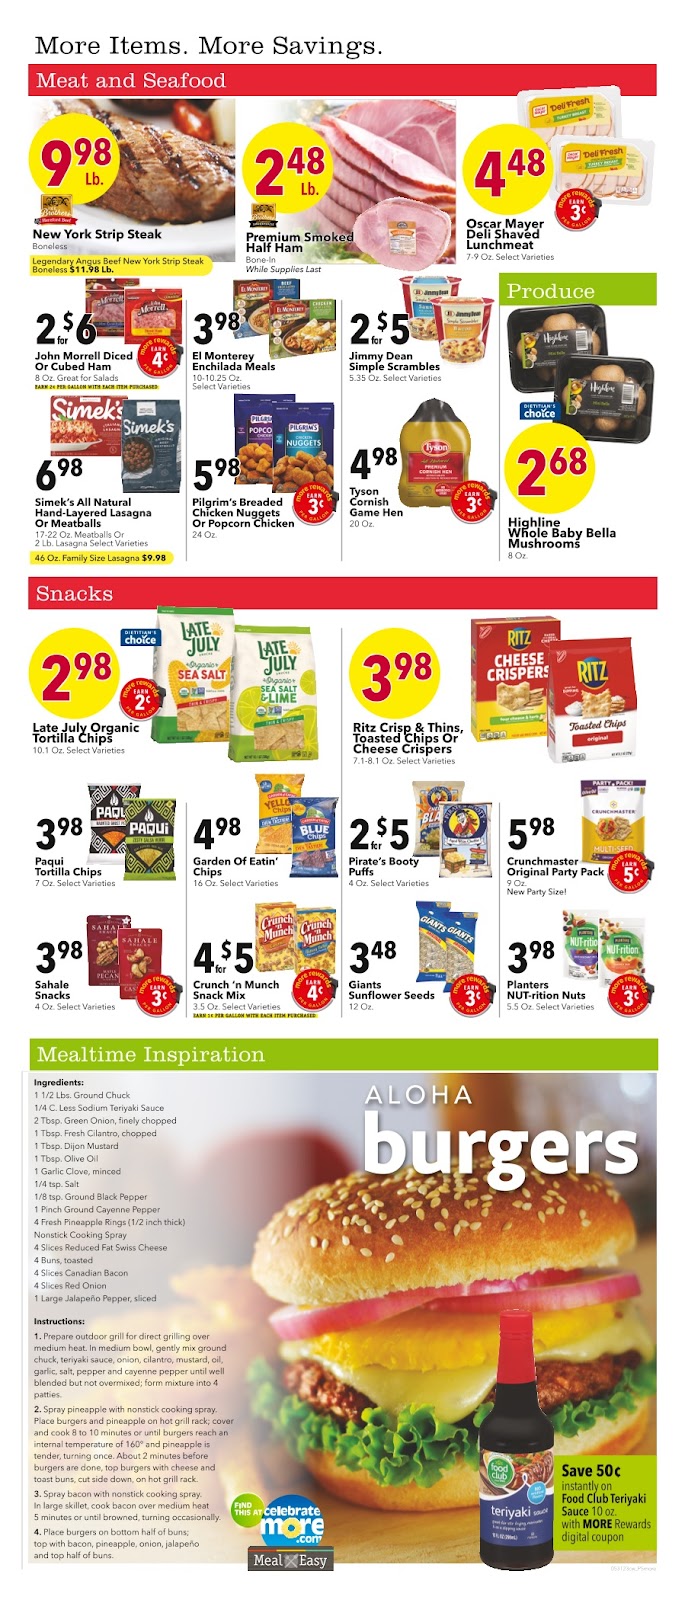 Cash Wise Weekly Ad - 5